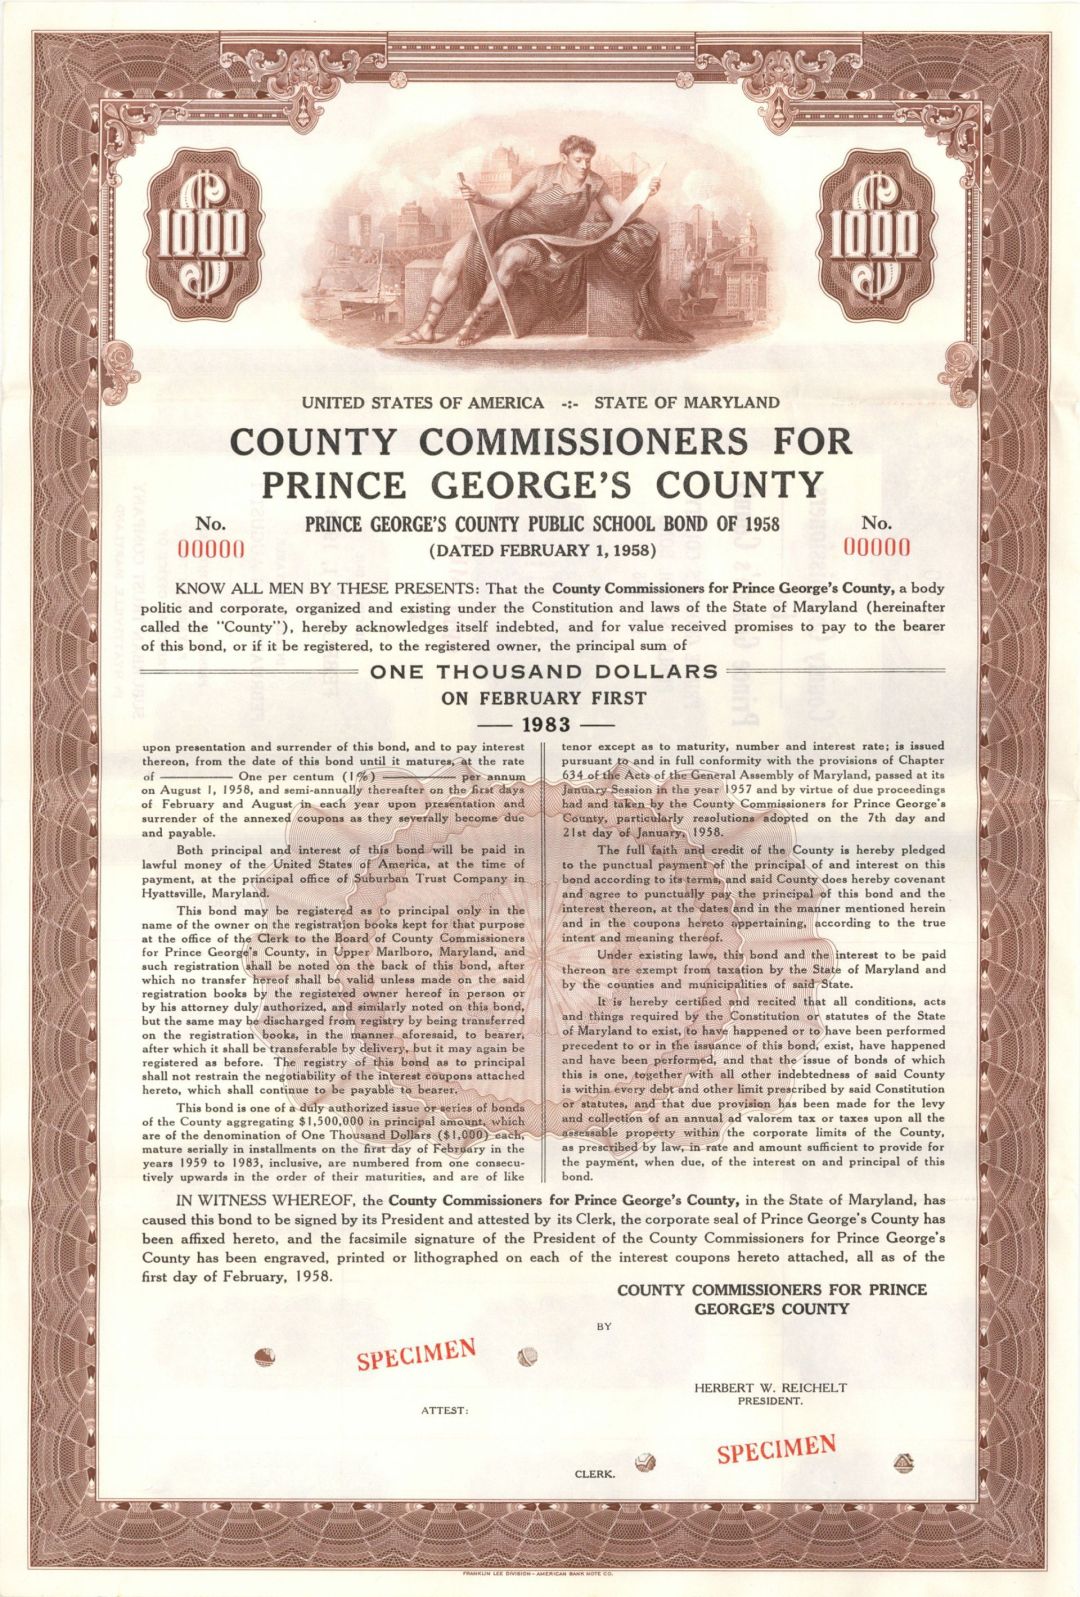 County Commissioners For Prince George's County - $1,000 Specimen Bond